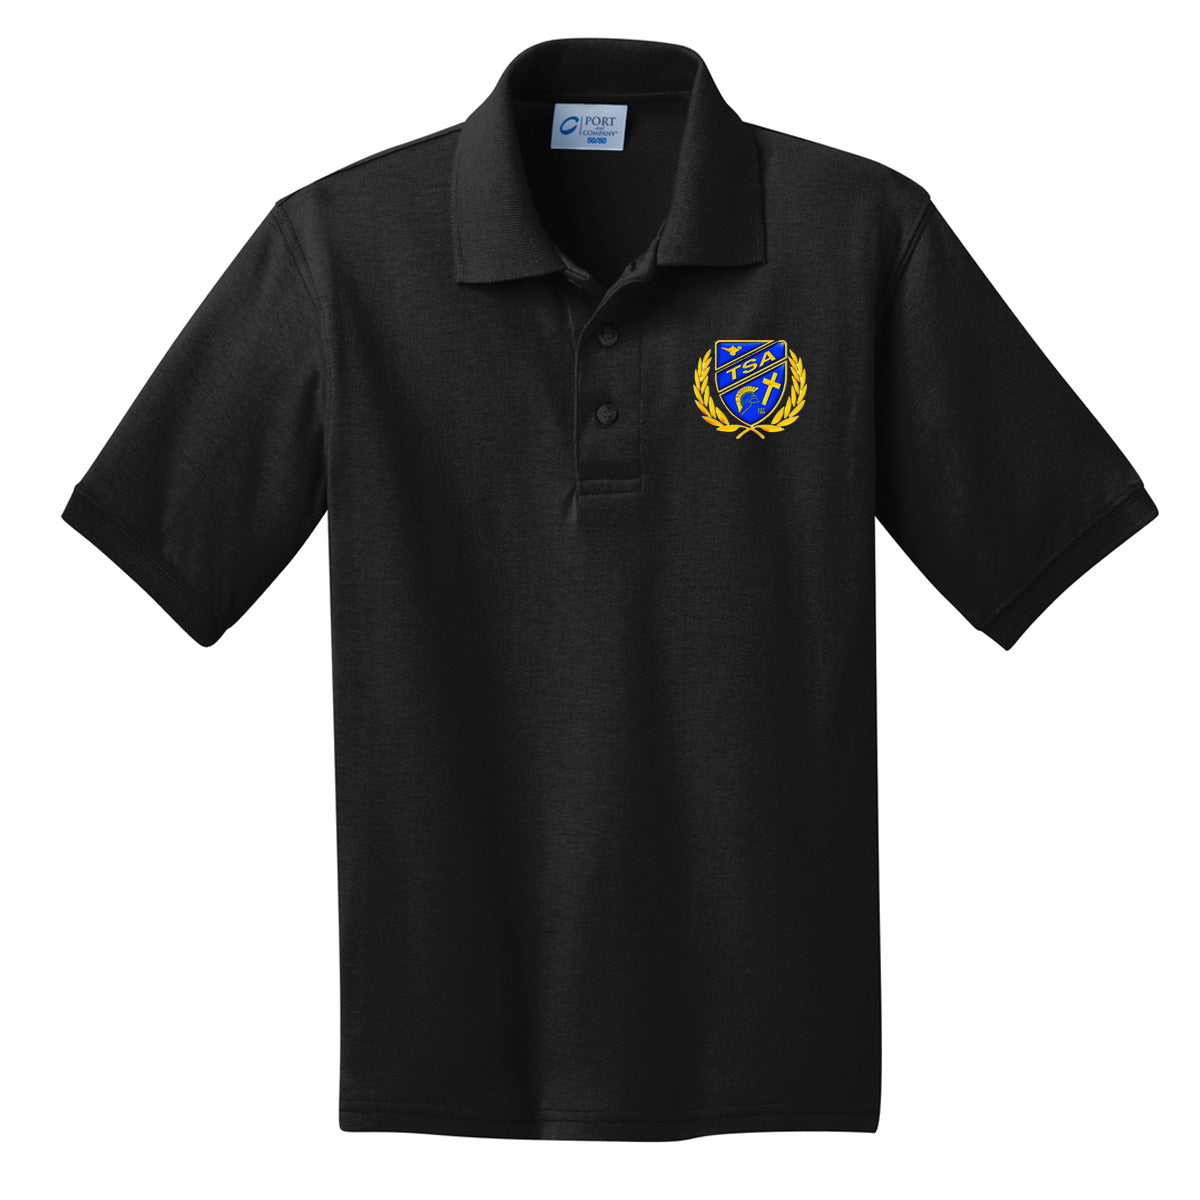 Tattnall - Toddler/Youth Polo with Crest - Black (KP55Y) - Southern Grace Creations